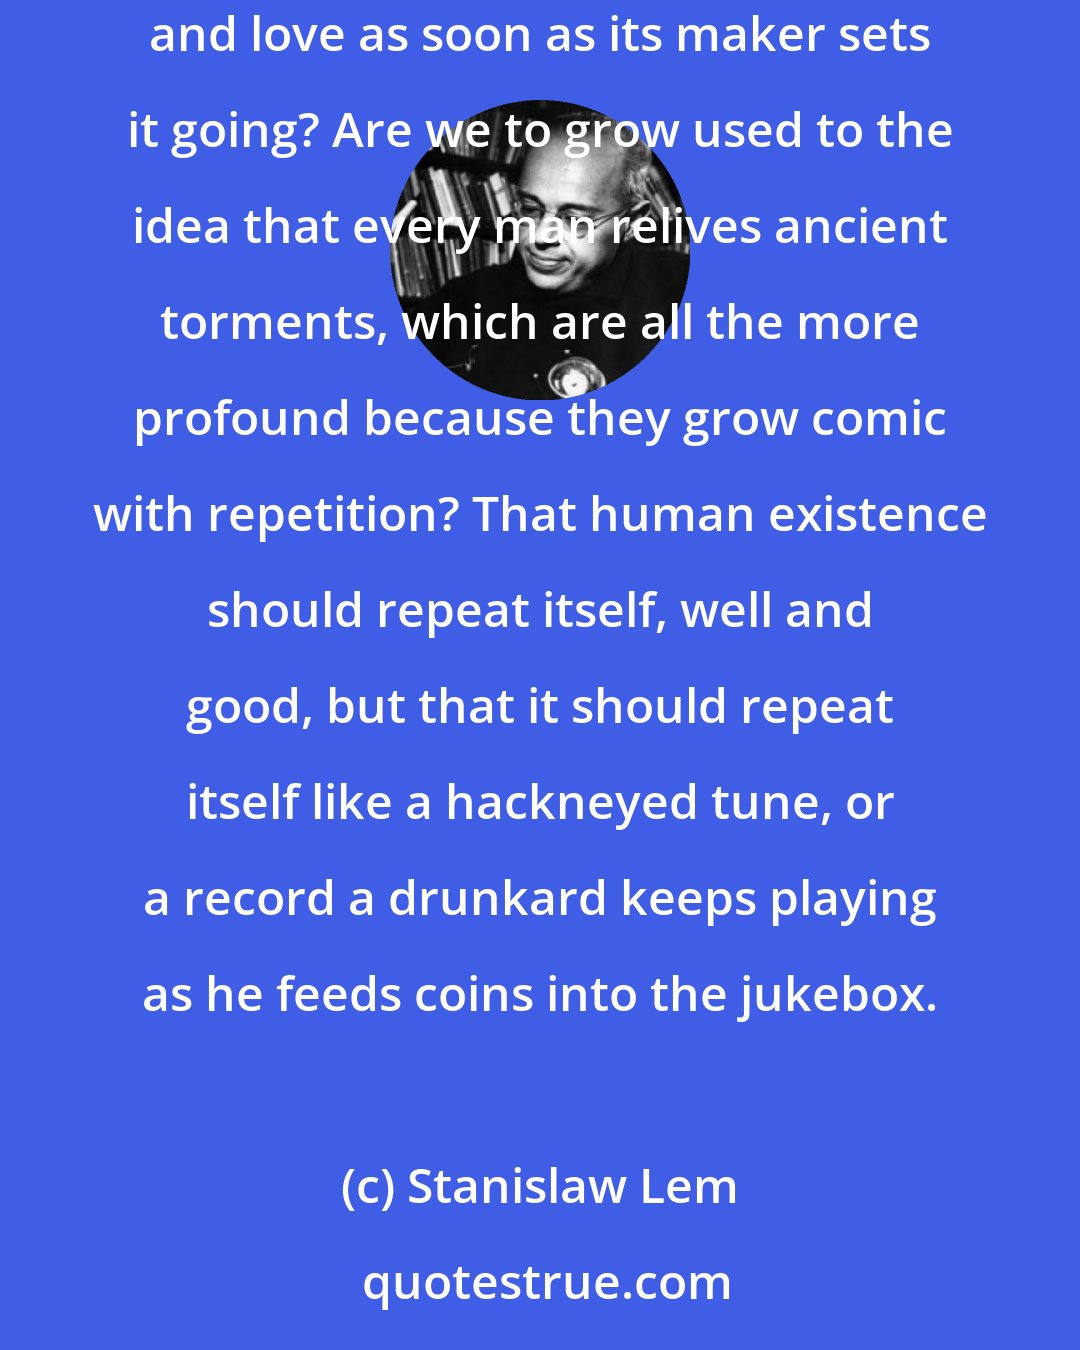 Stanislaw Lem: So one must be resigned to being a clock that measures the passage of time, now out of order, now repaired, and whose mechanism generates despair and love as soon as its maker sets it going? Are we to grow used to the idea that every man relives ancient torments, which are all the more profound because they grow comic with repetition? That human existence should repeat itself, well and good, but that it should repeat itself like a hackneyed tune, or a record a drunkard keeps playing as he feeds coins into the jukebox.